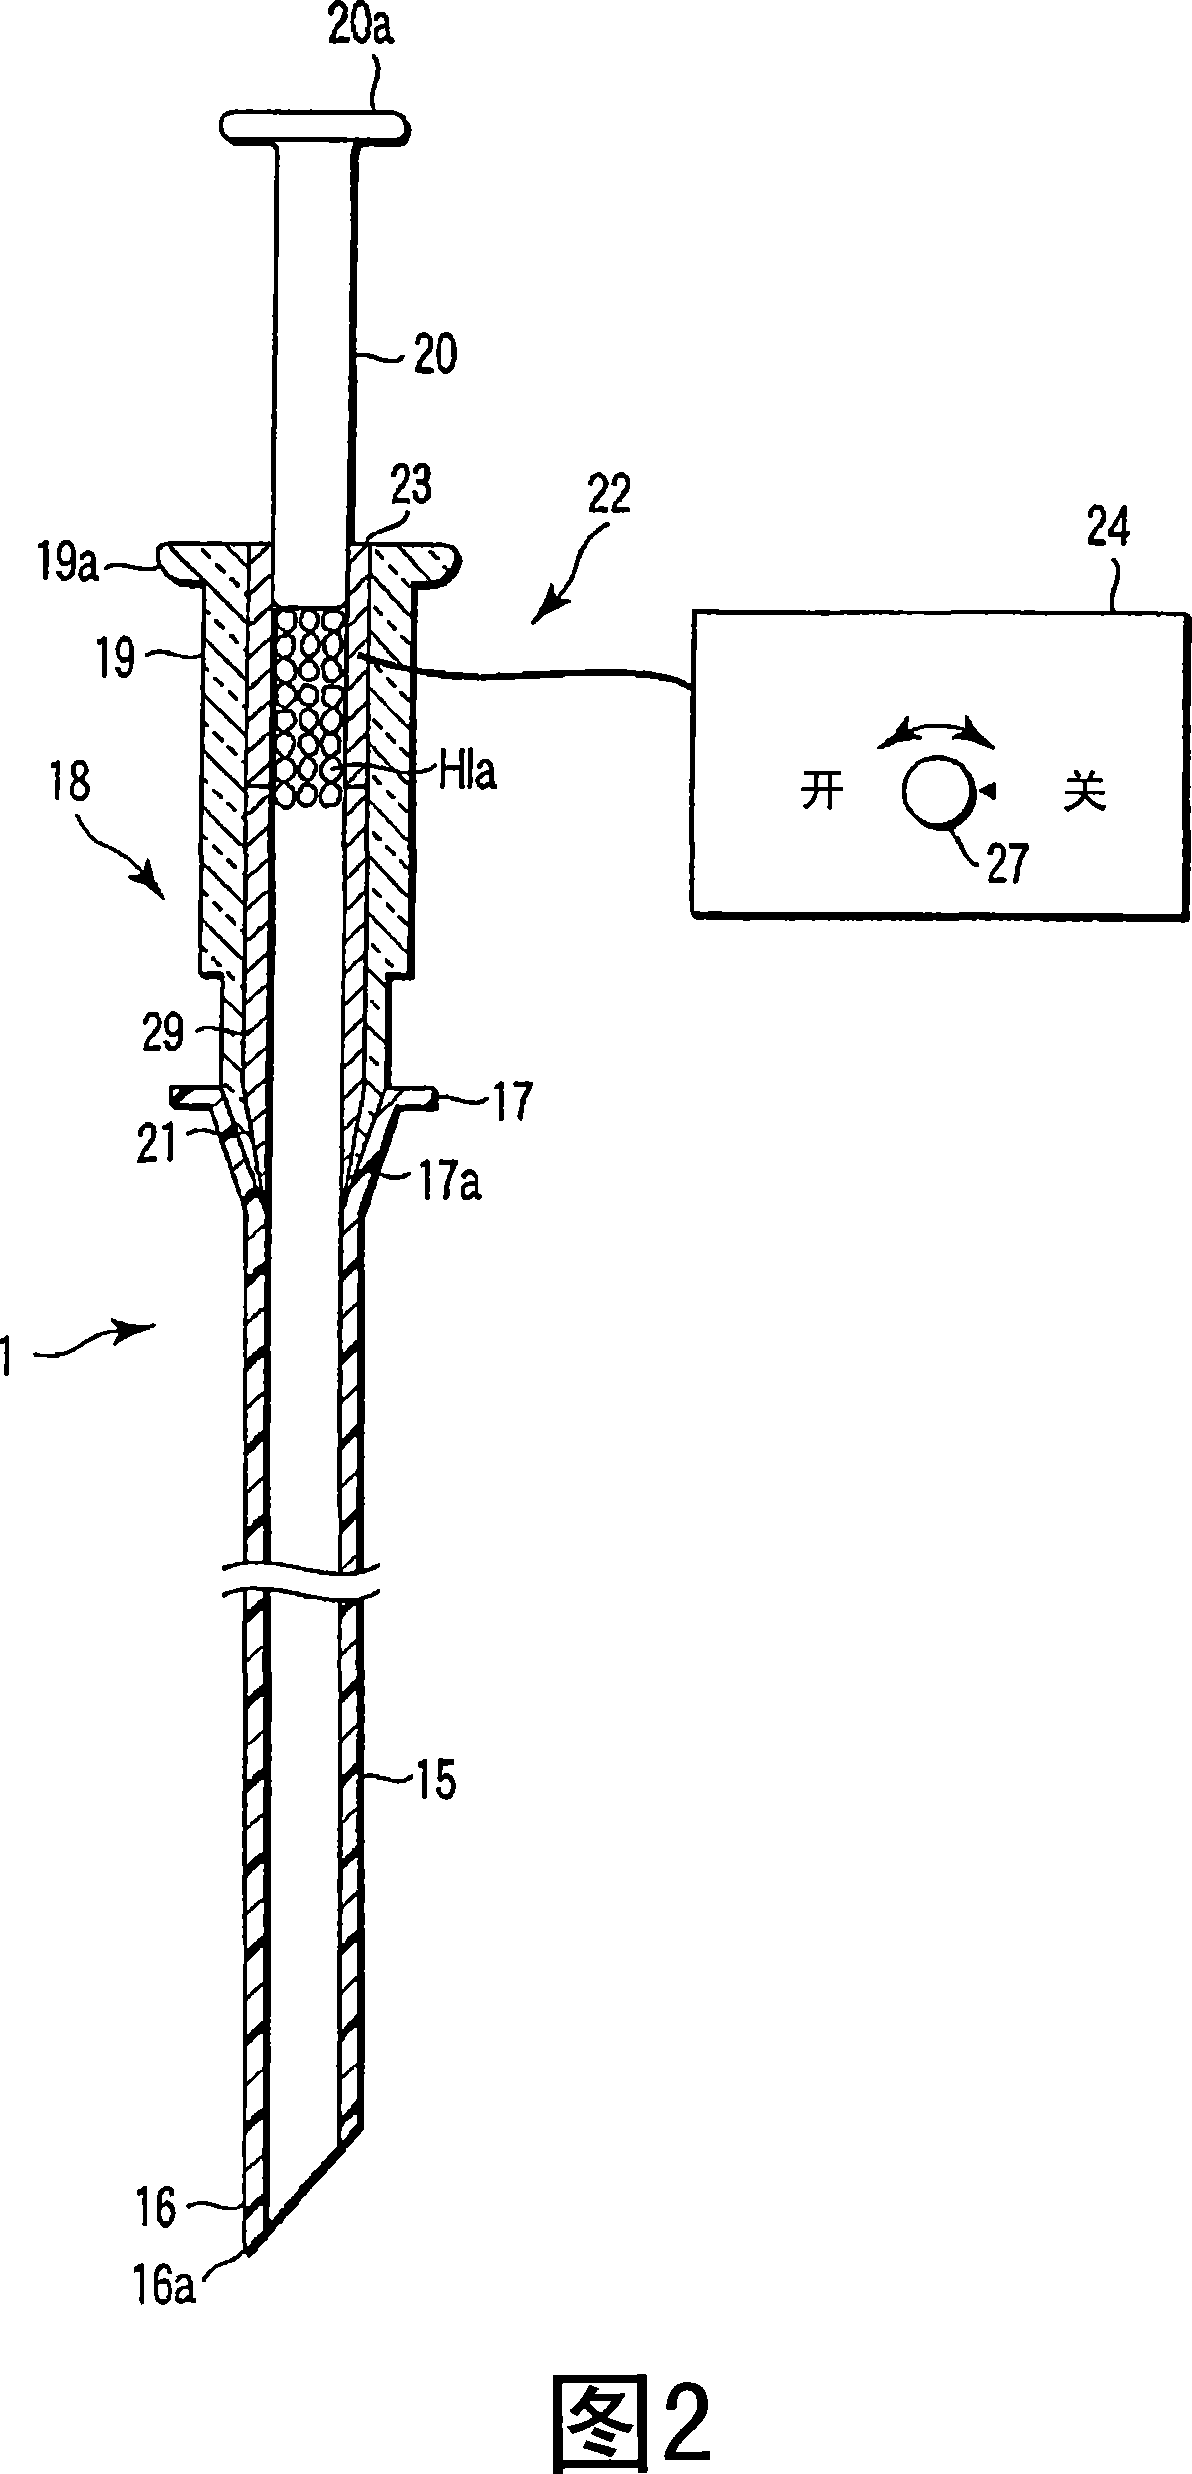 Endoscopic therapeutic device, living body tissue analyzing and processing system, and sample-taking method for tissue analysis process